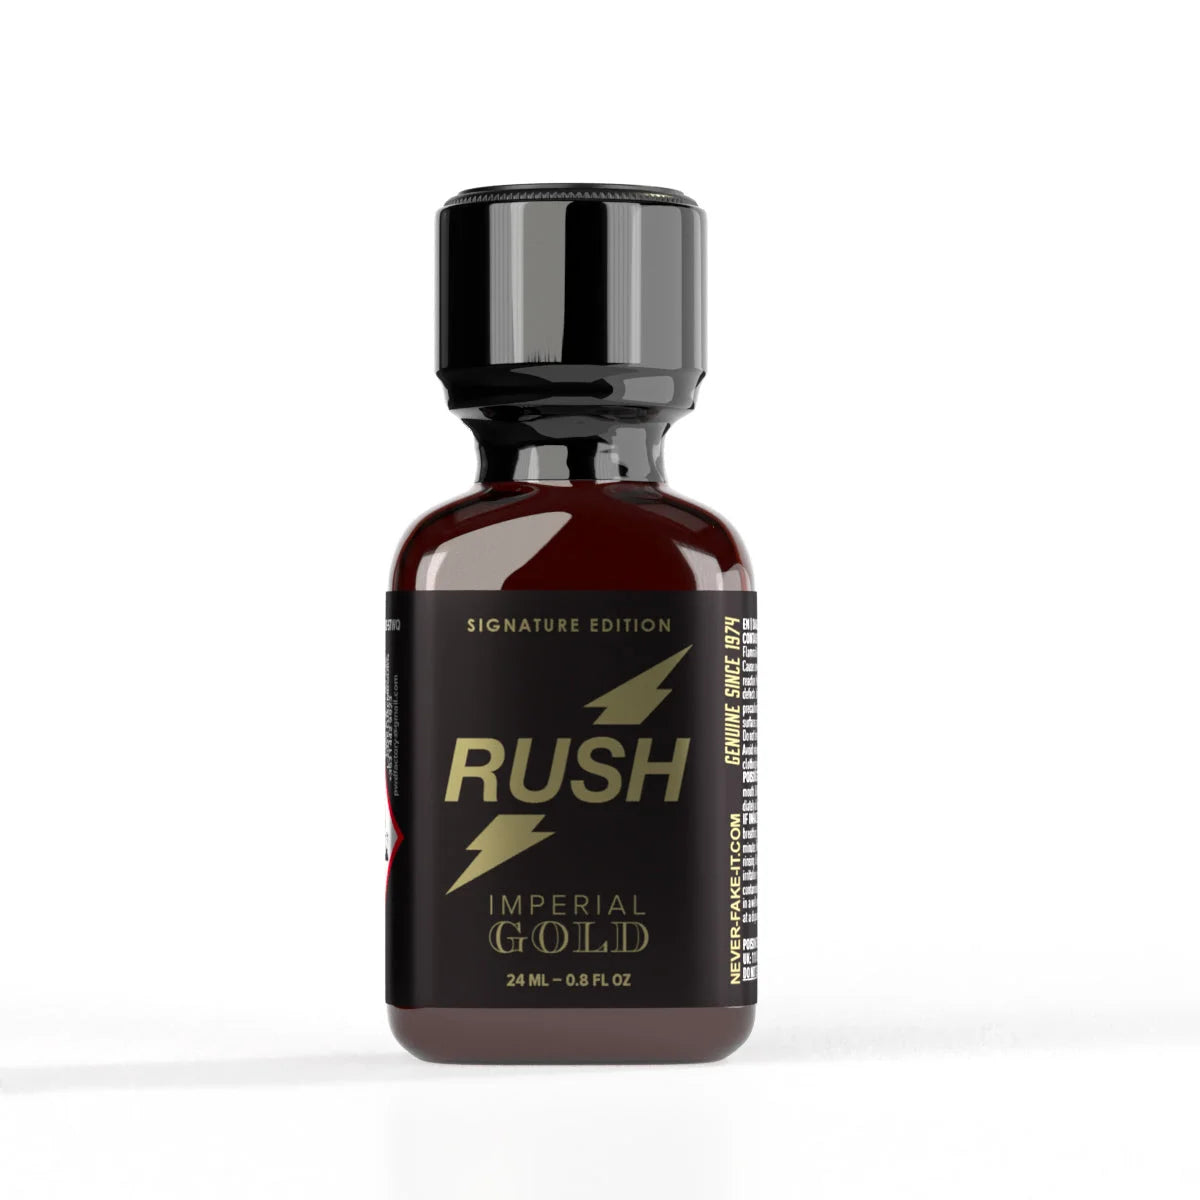 A product photo of a bottle of Rush Imperial Gold Poppers.